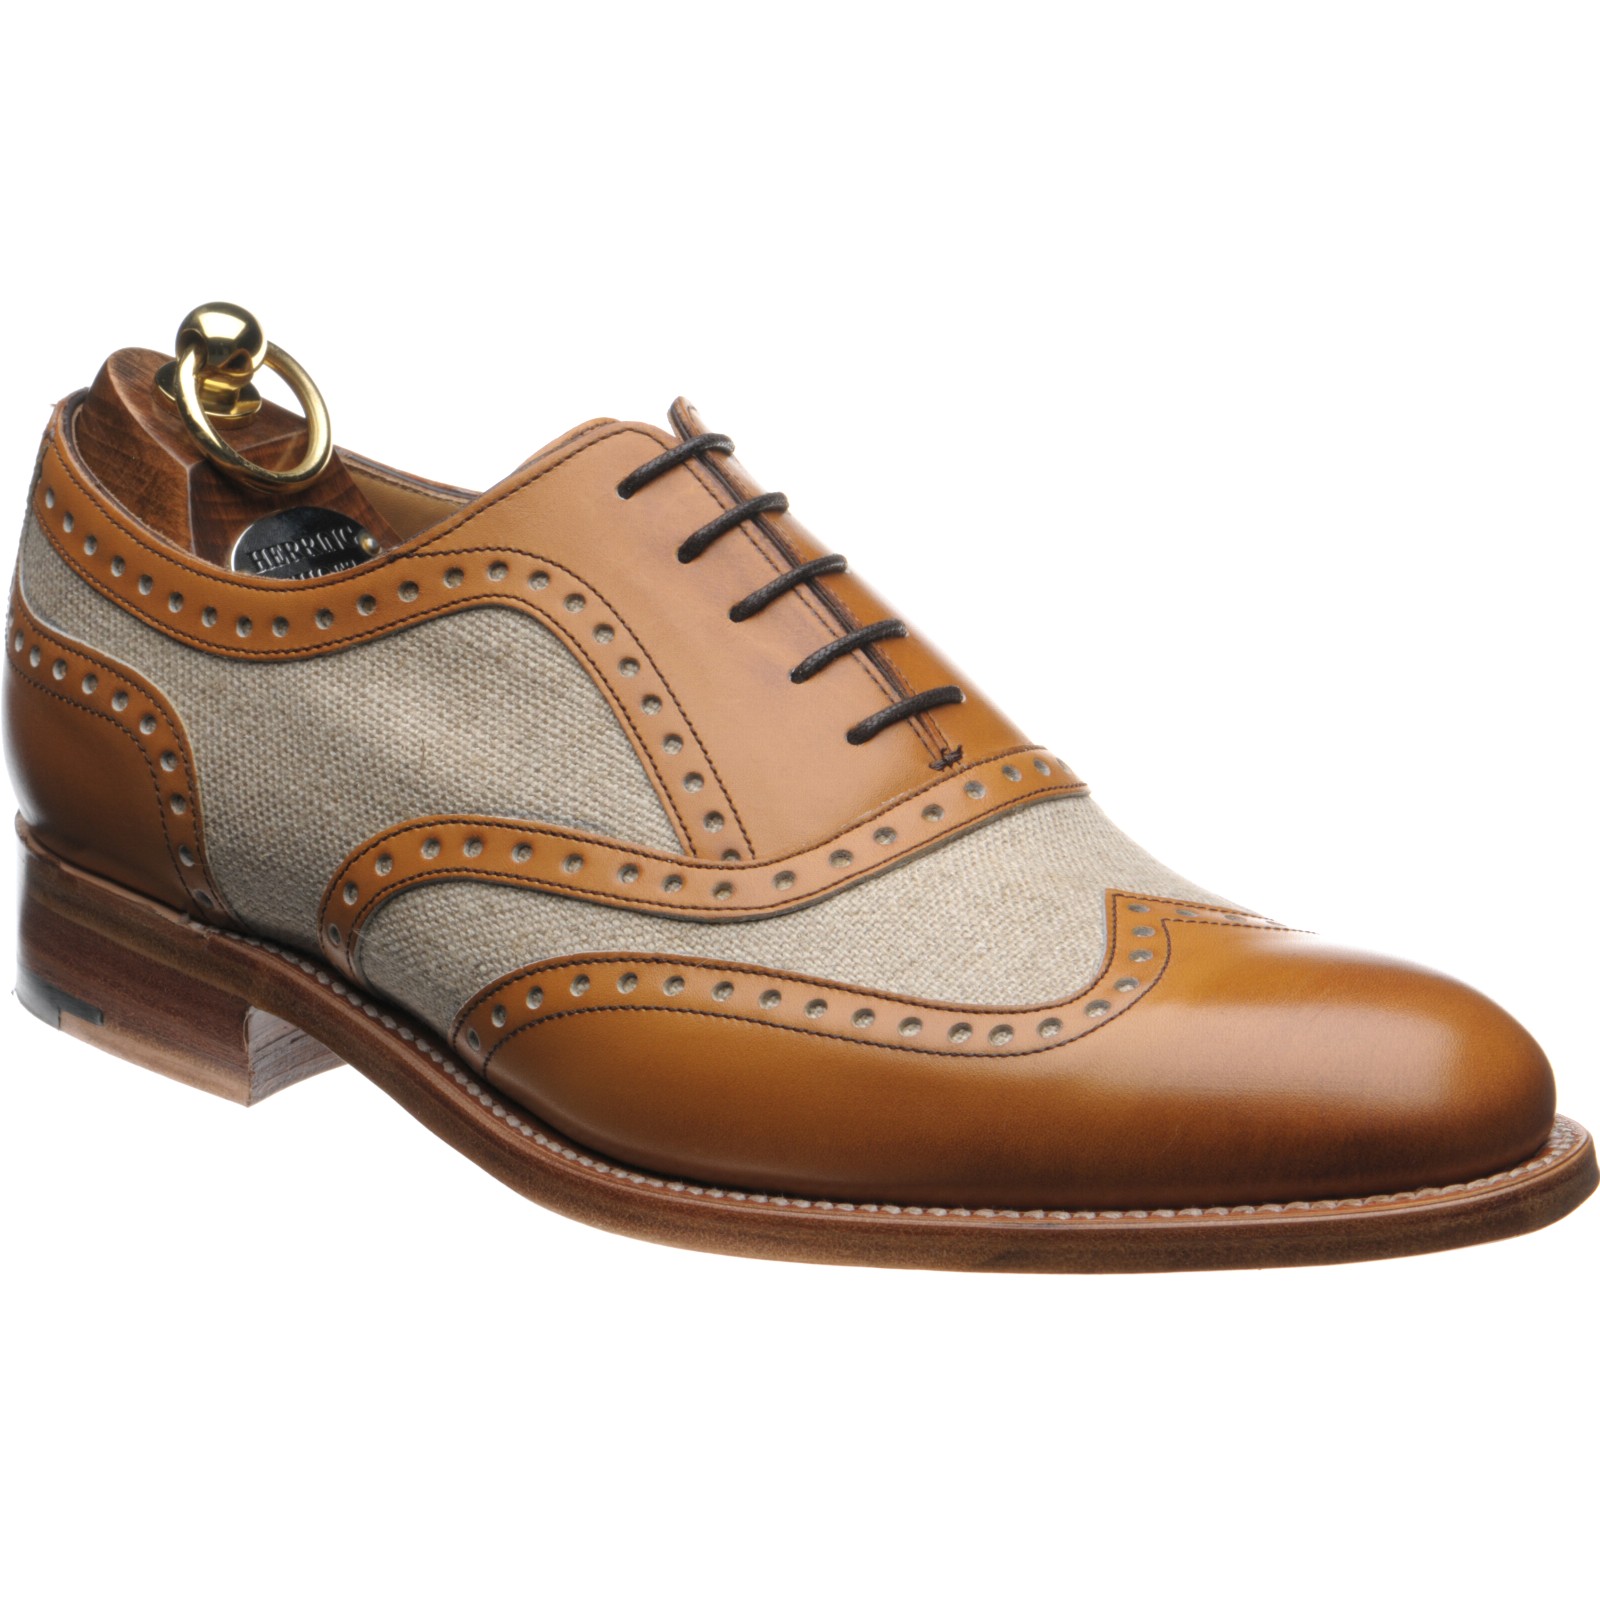 Herring shoes | Herring Classic | Henley II in Tan and Canvas at ...